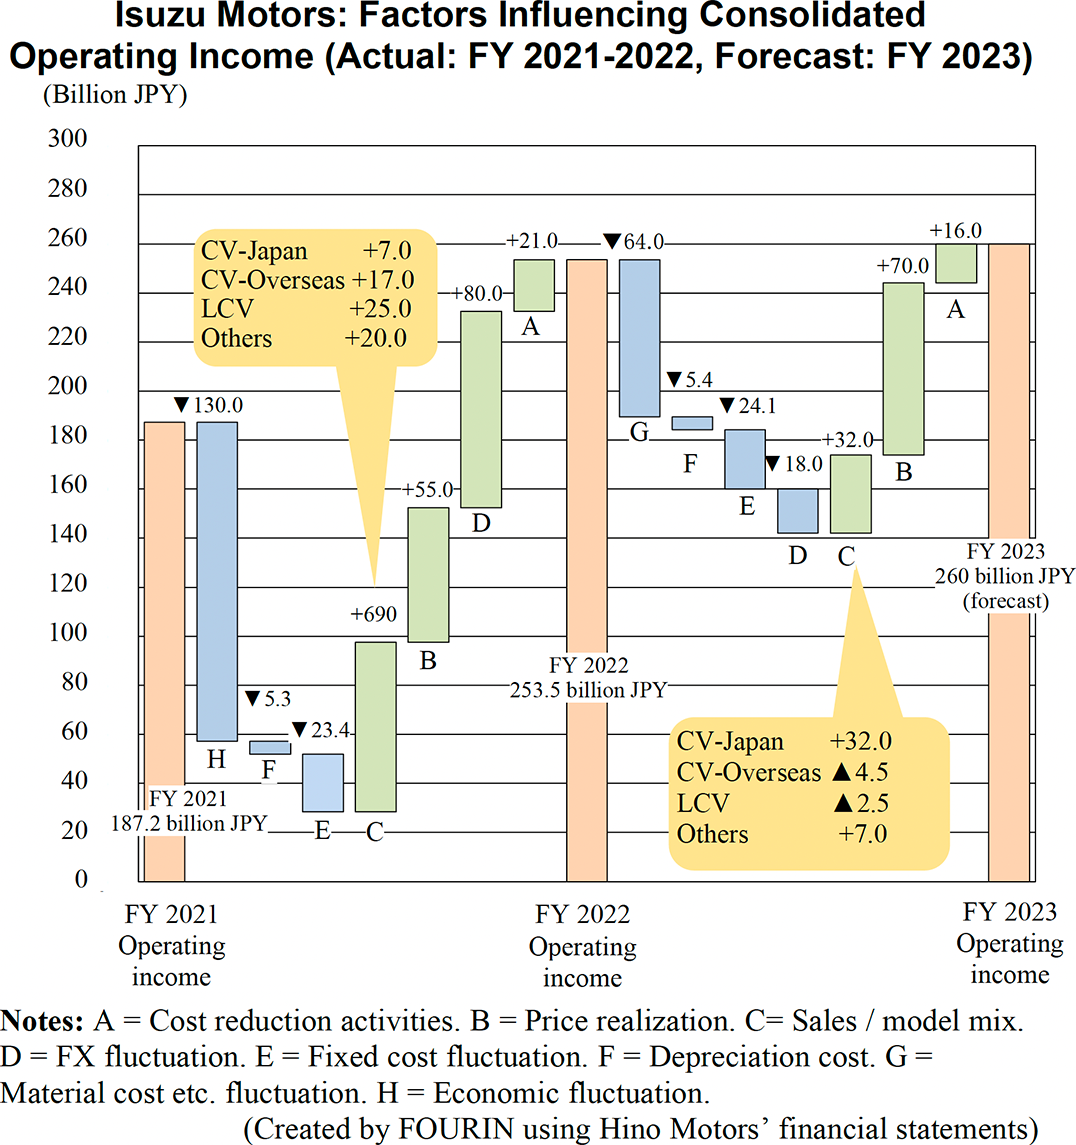 Graph: Isuzu Motors: Factors Influencing Consolidated Operating Income (Actual: FY 2021-2022, Forecast: FY 2023)